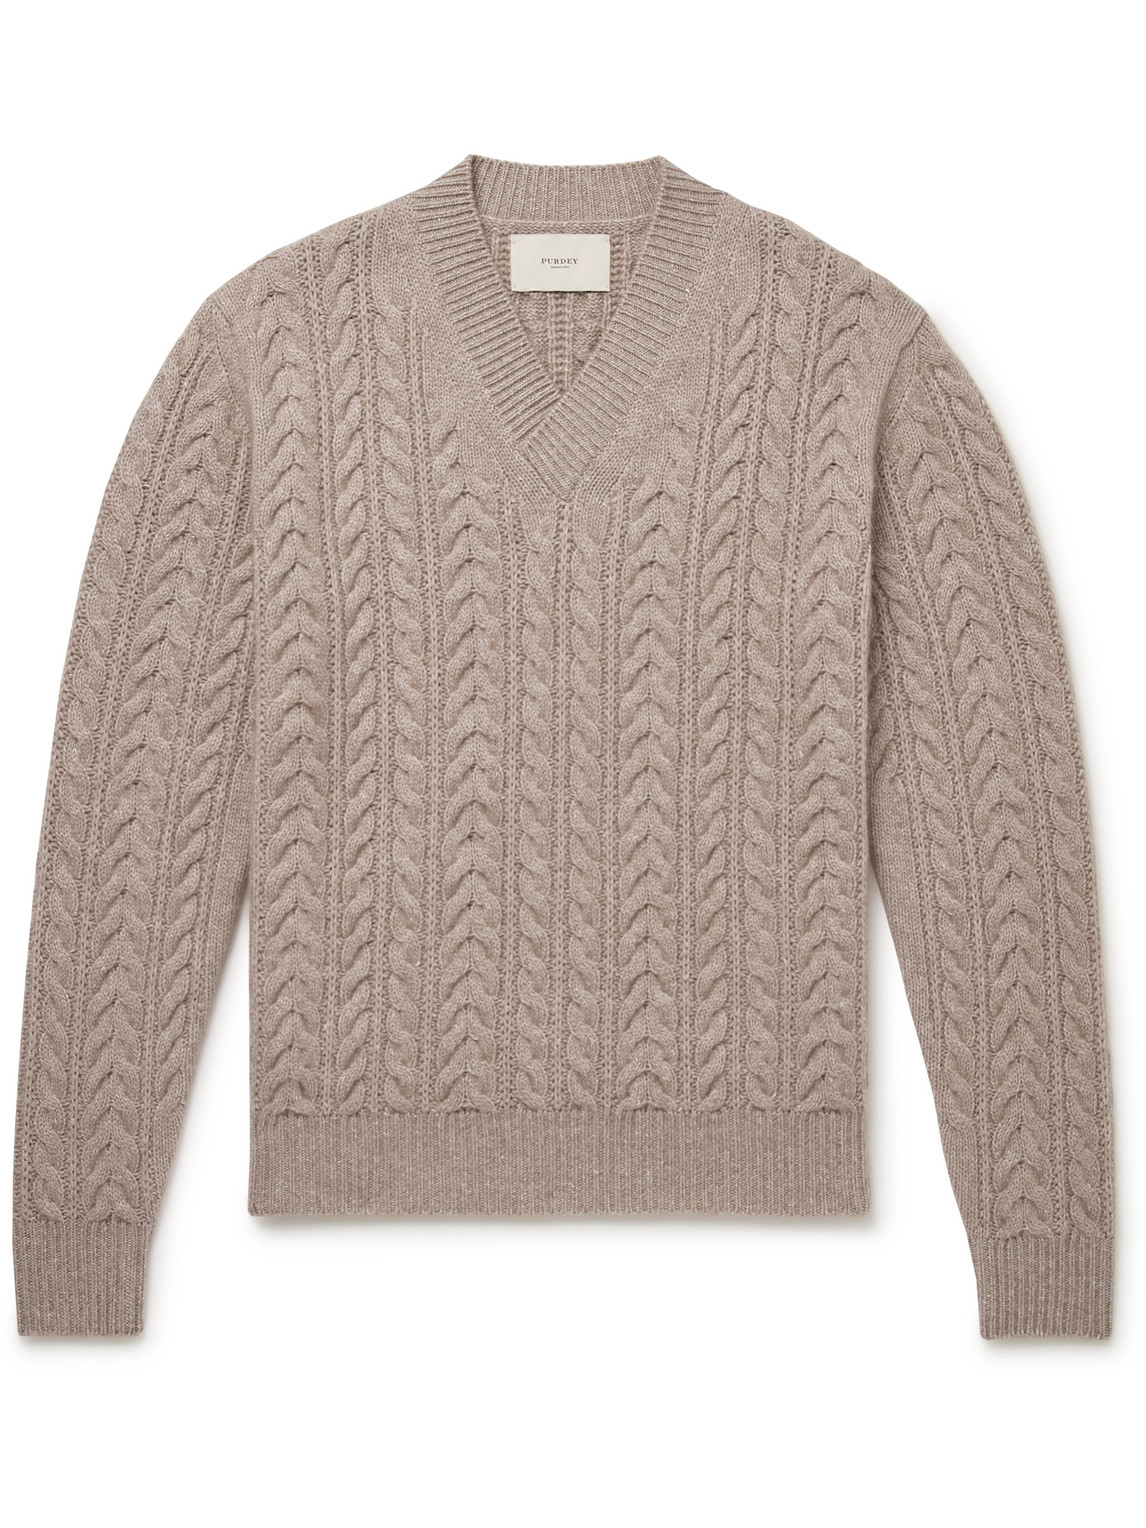 Slim-Fit Cable-Knit Cashmere and Linen-Blend Sweater